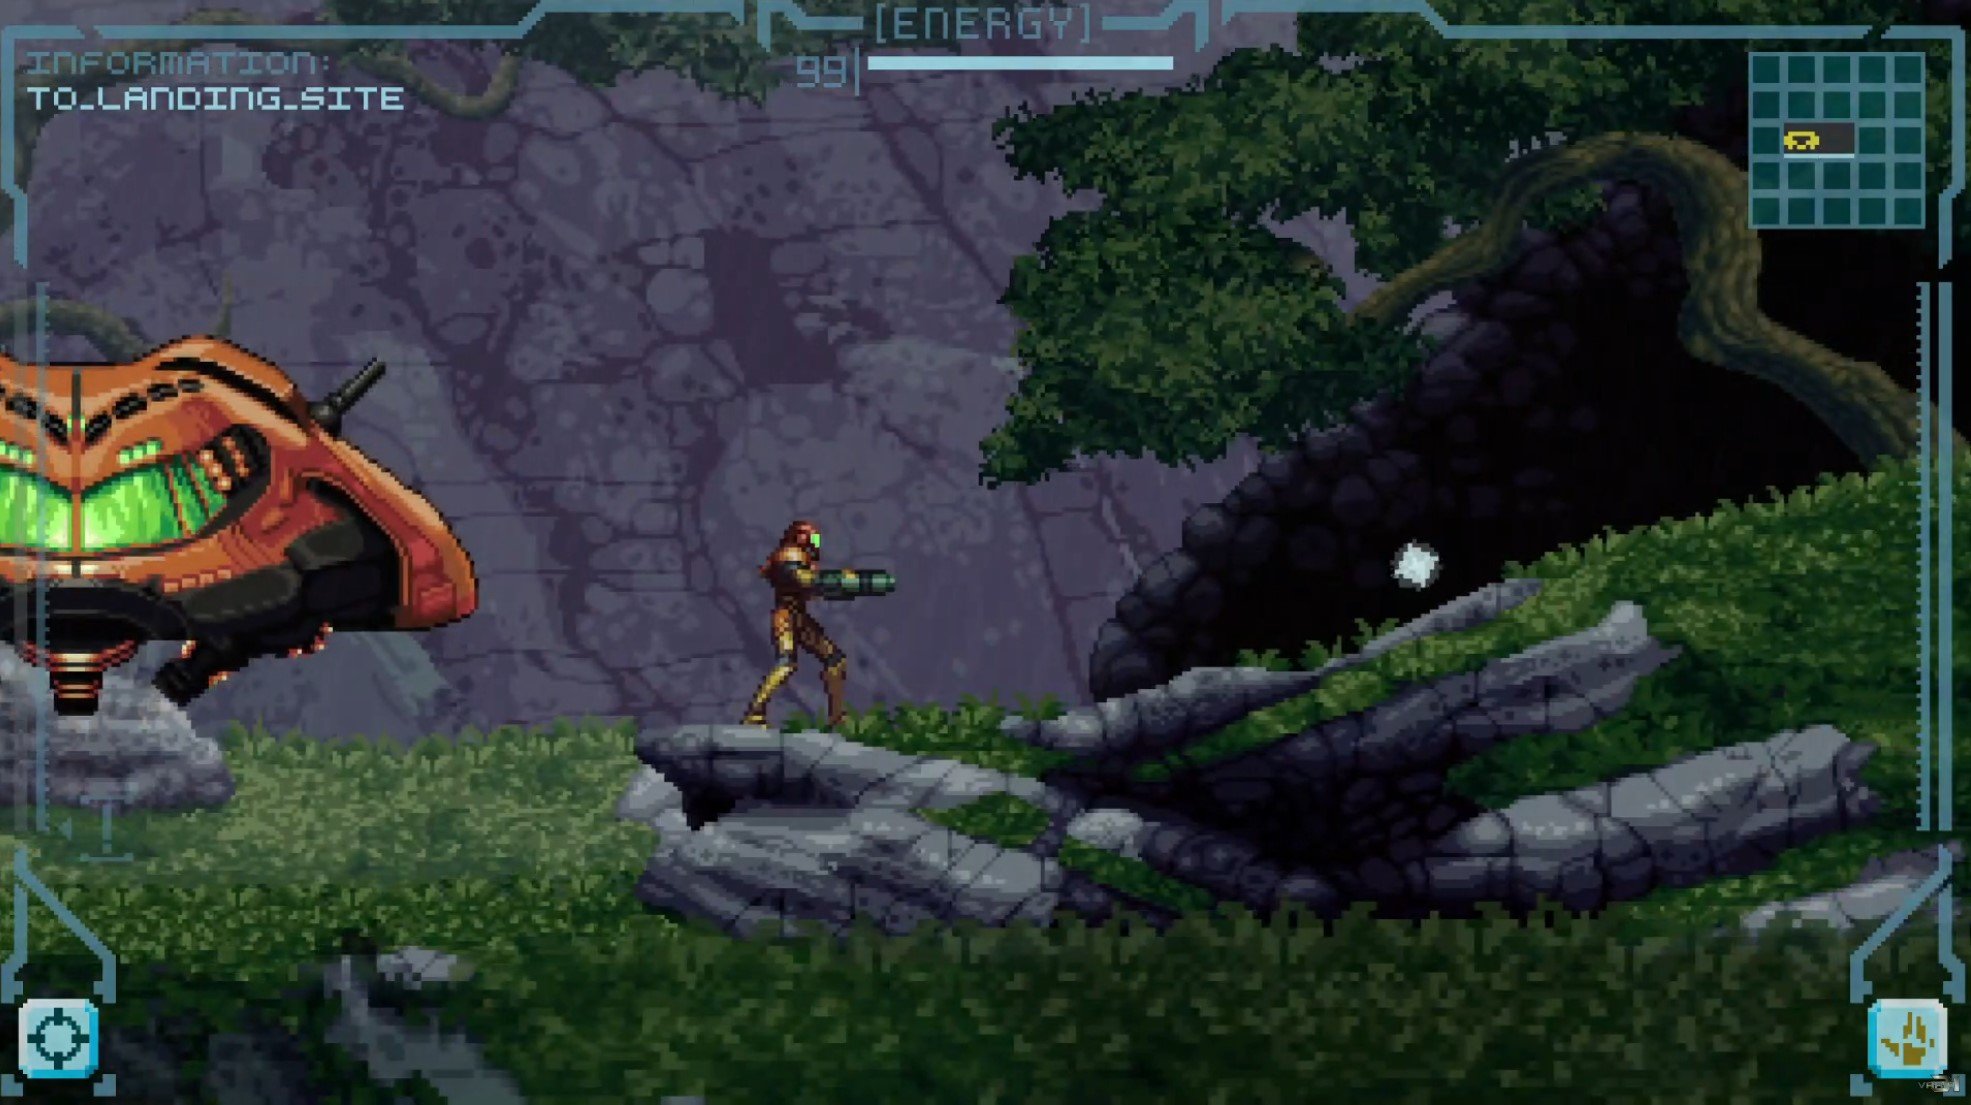 The Metroid Prime 2D trailer project, which is 15 years in the making, has a playable demo